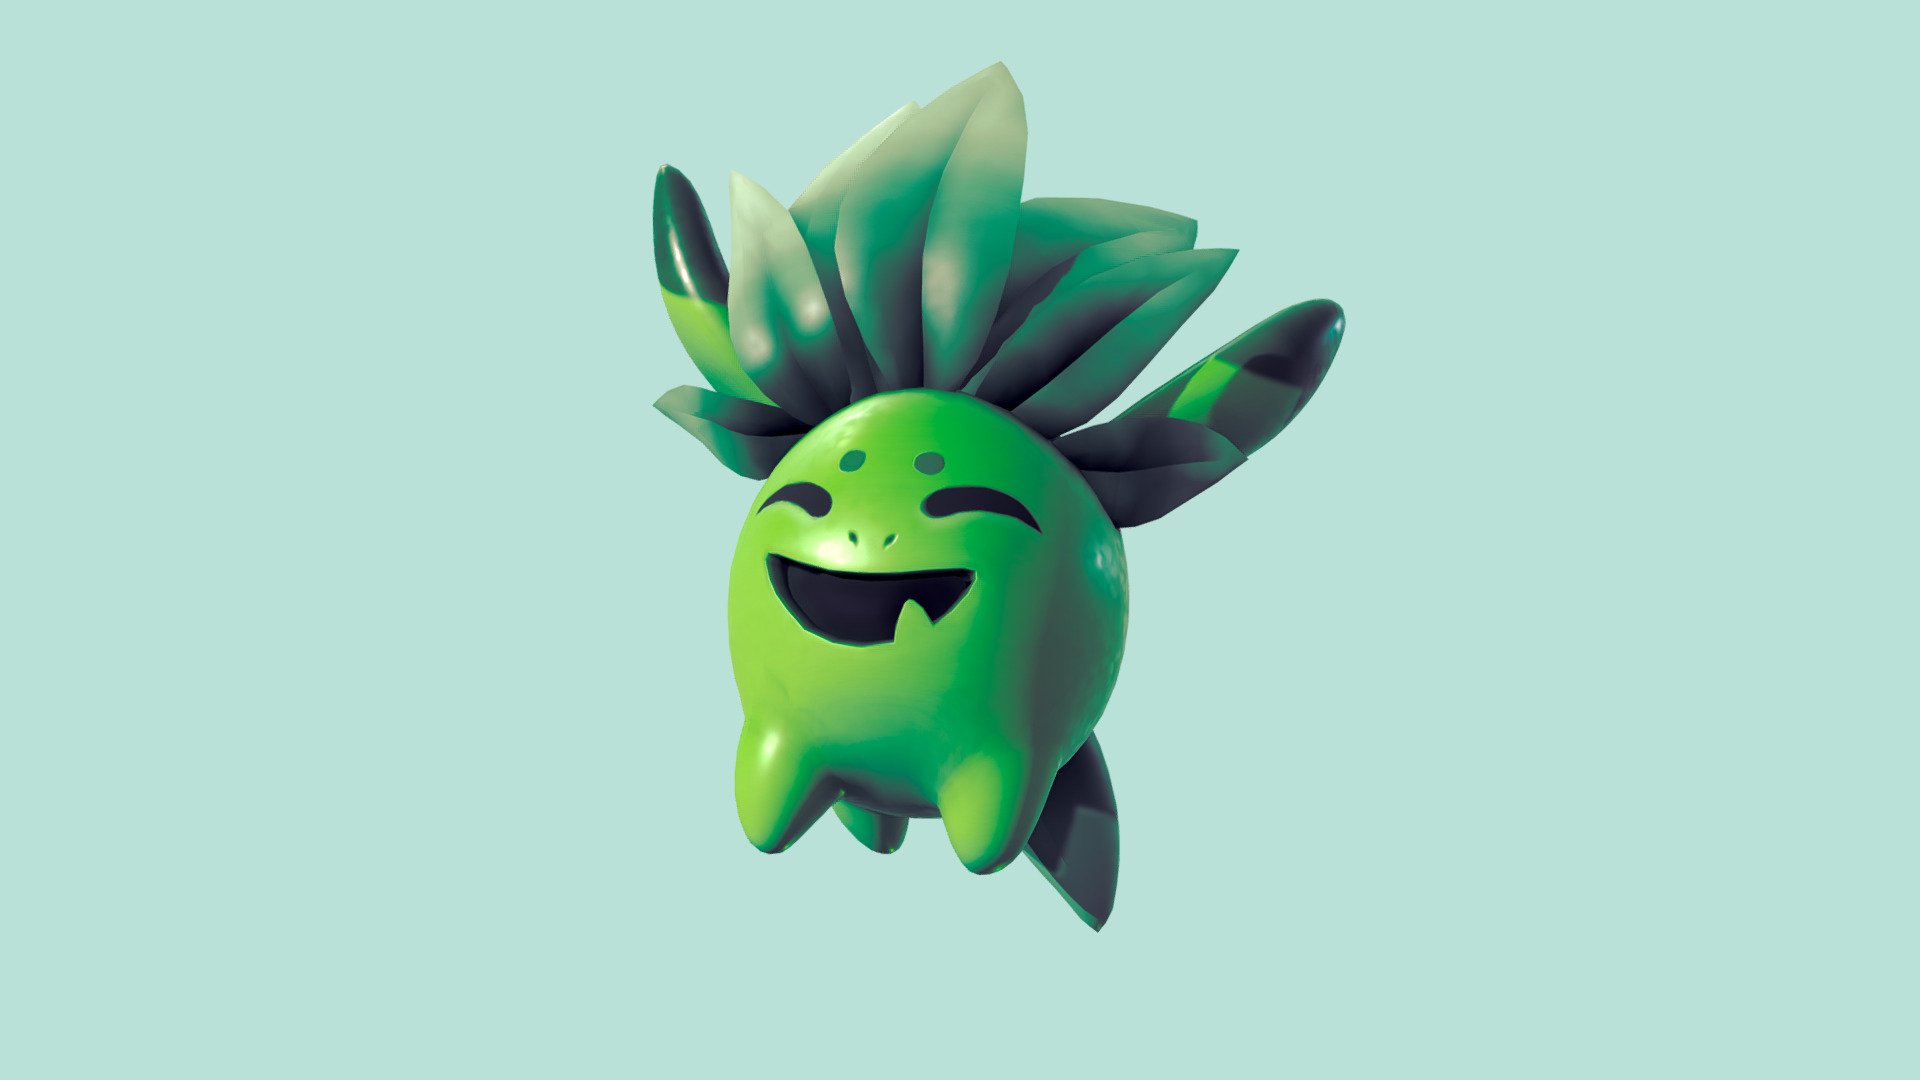 A green drakky fruit, commissioned and designed by Sandstormer Art!

Follow them on Twitter for more fun creature concepts: https://twitter.com/SandstormerArt - Green Drakky Fruit (Concept by Sandstormer Art) - 3D model by Dex Jones (@DexJones) 3d model